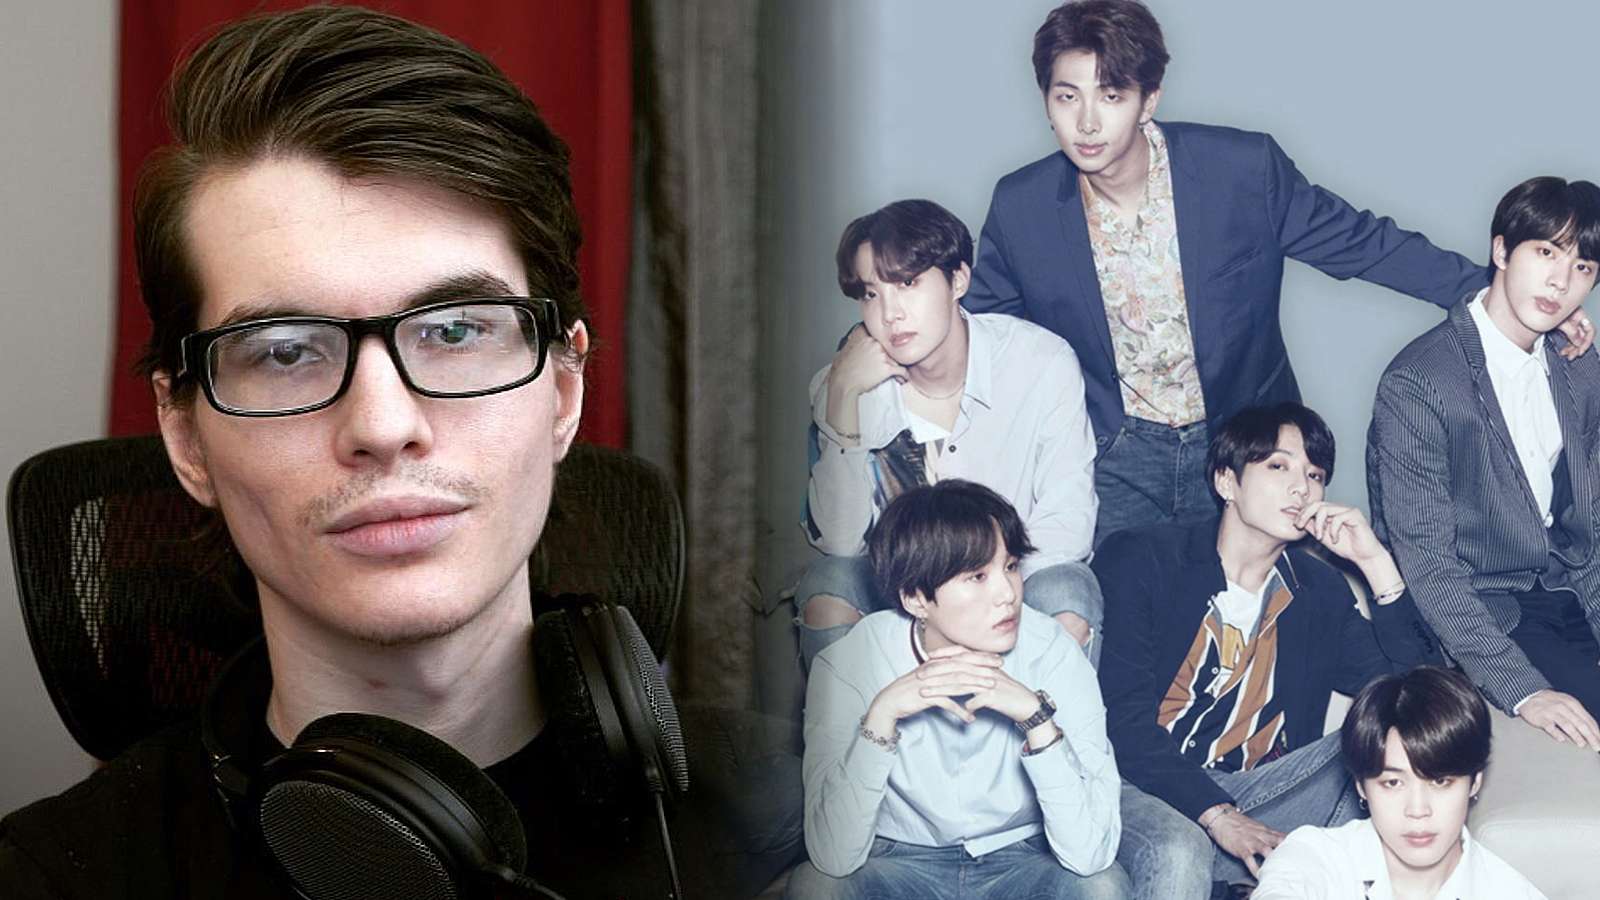 A photo of Froste positioned next to a group photo of the BTS members.